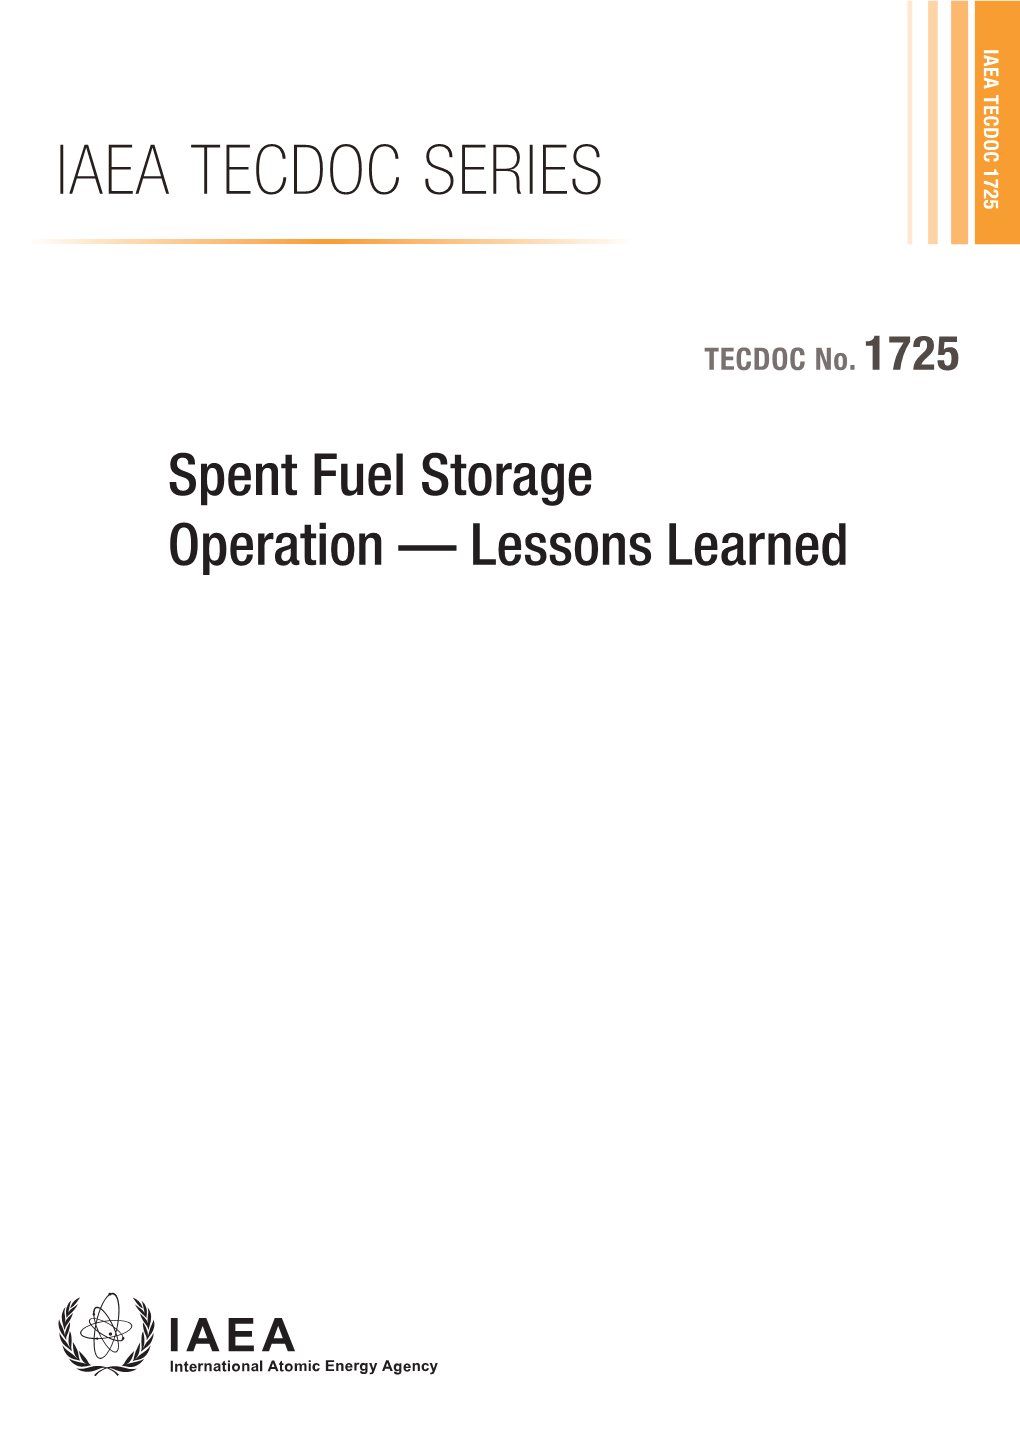 Spent Fuel Storage Operation — Lessons Learned